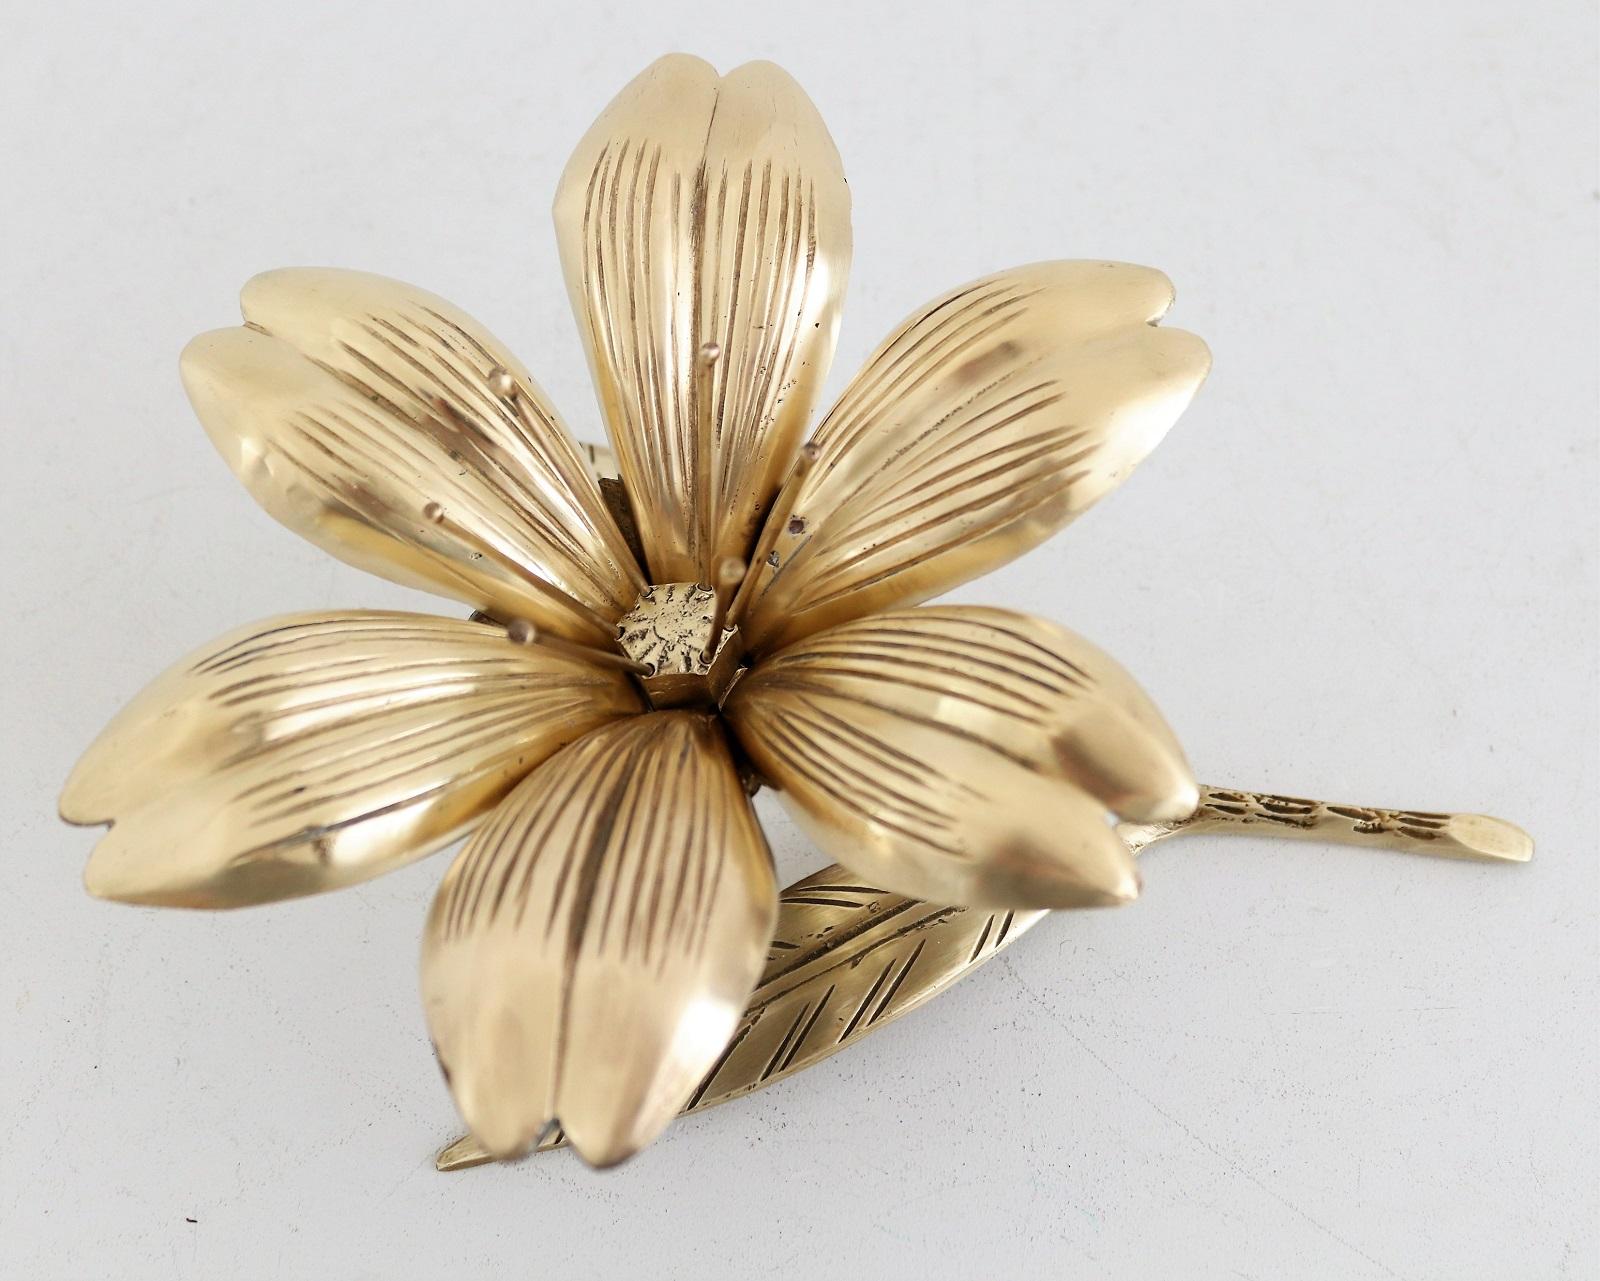 Italian Midcentury Flower in Brass with Petal Ashtrays for Cigarettes, 1950s 5